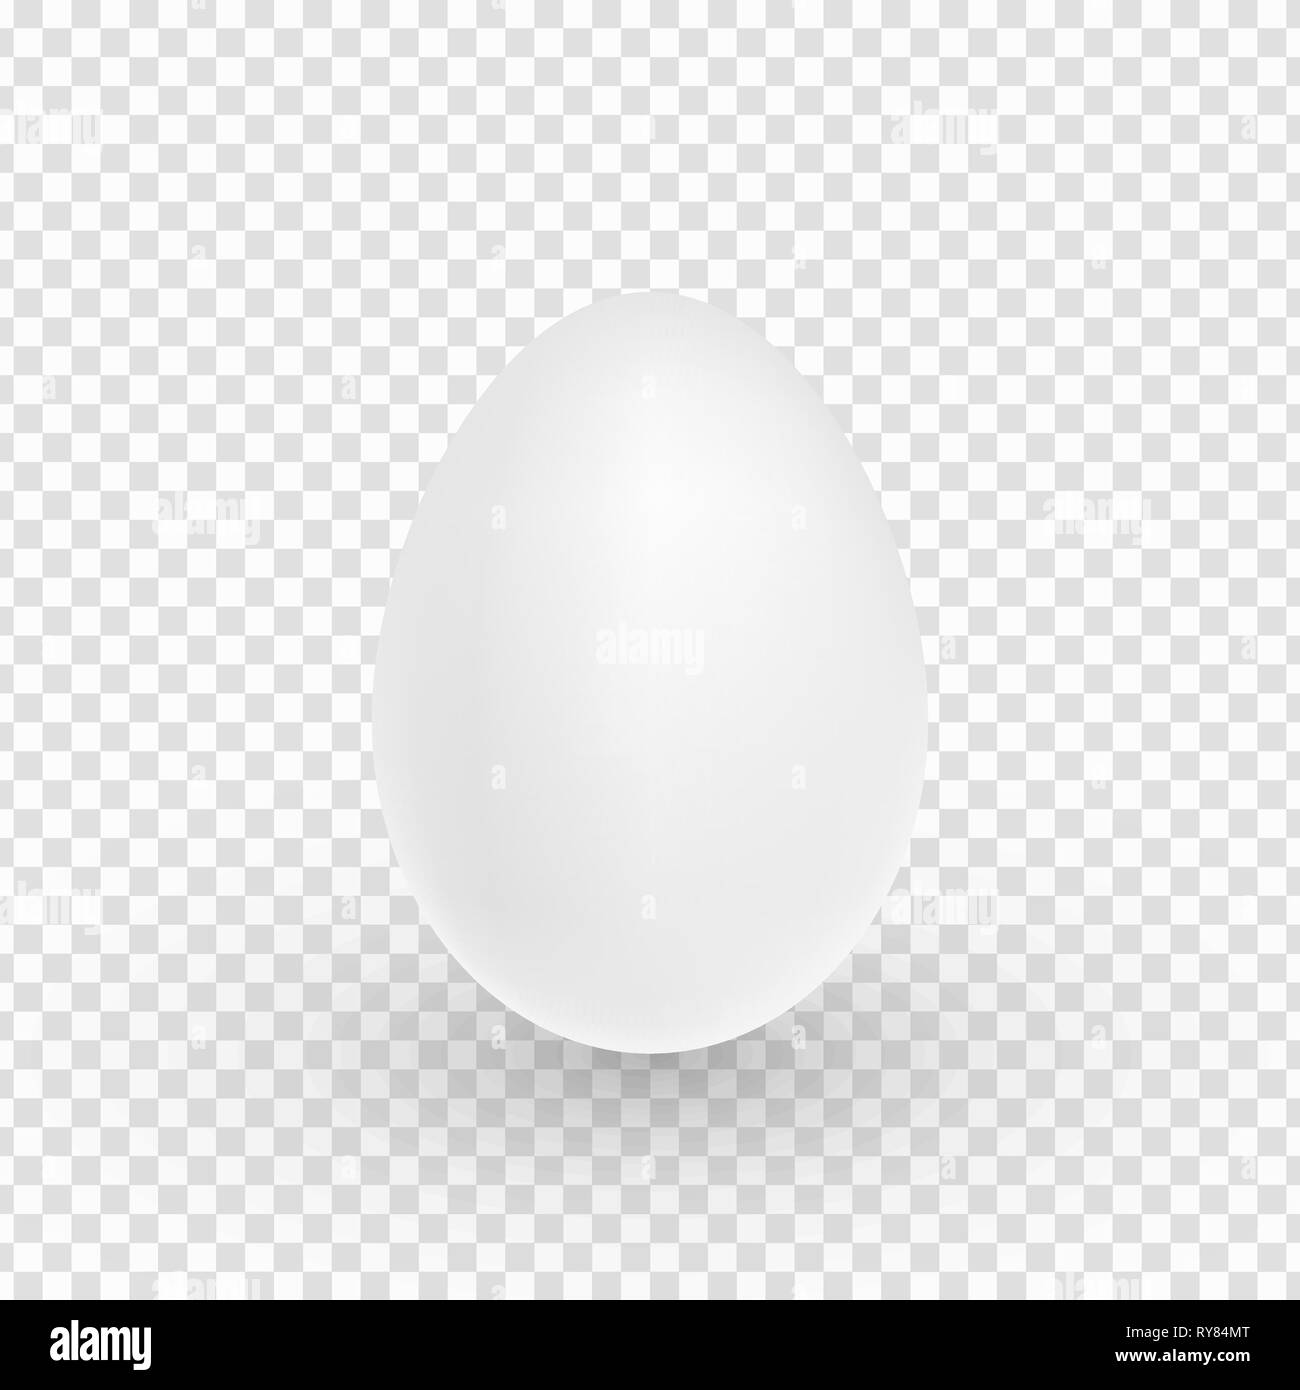 Realistic easter egg isolated on transparent background. Chicken 3d egg. Soft shadow. Festive element for your project. Vector illustration. EPS 10 Stock Vector